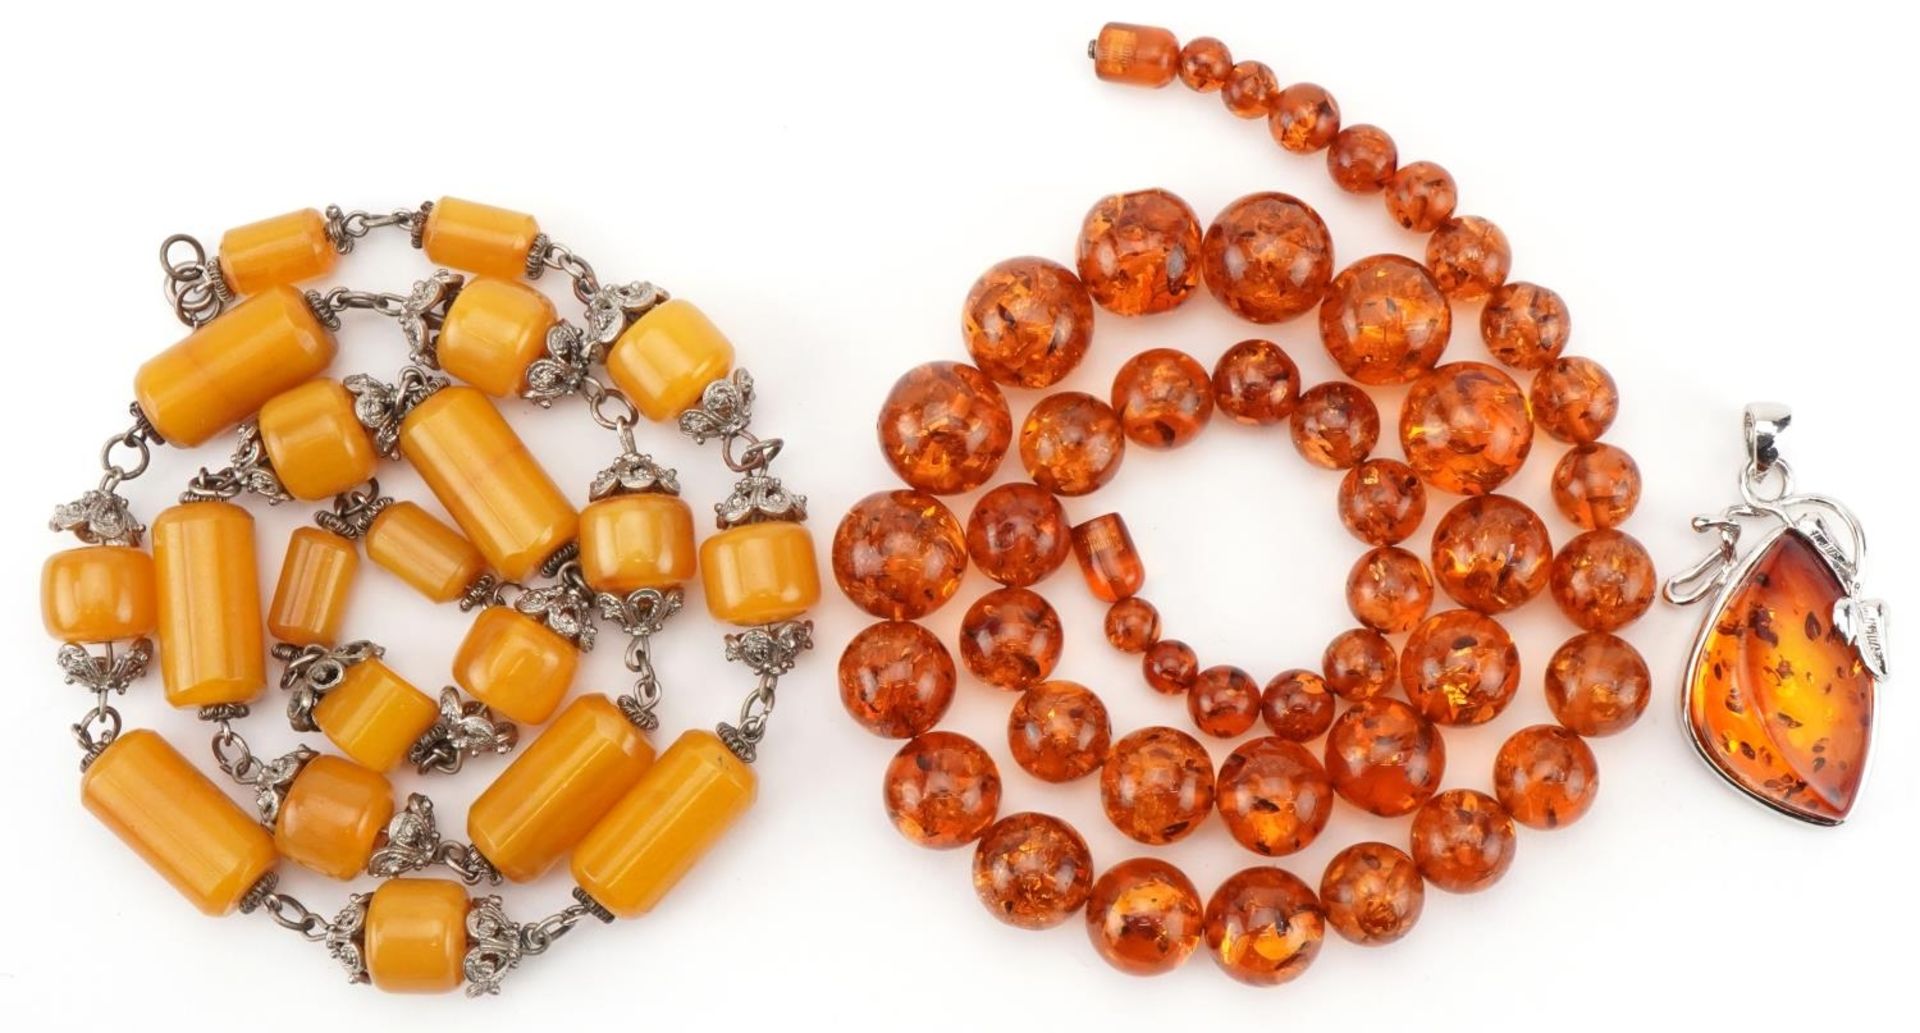 Natural amber bead necklace, pendant and an amber coloured necklace with white metal mounts, total